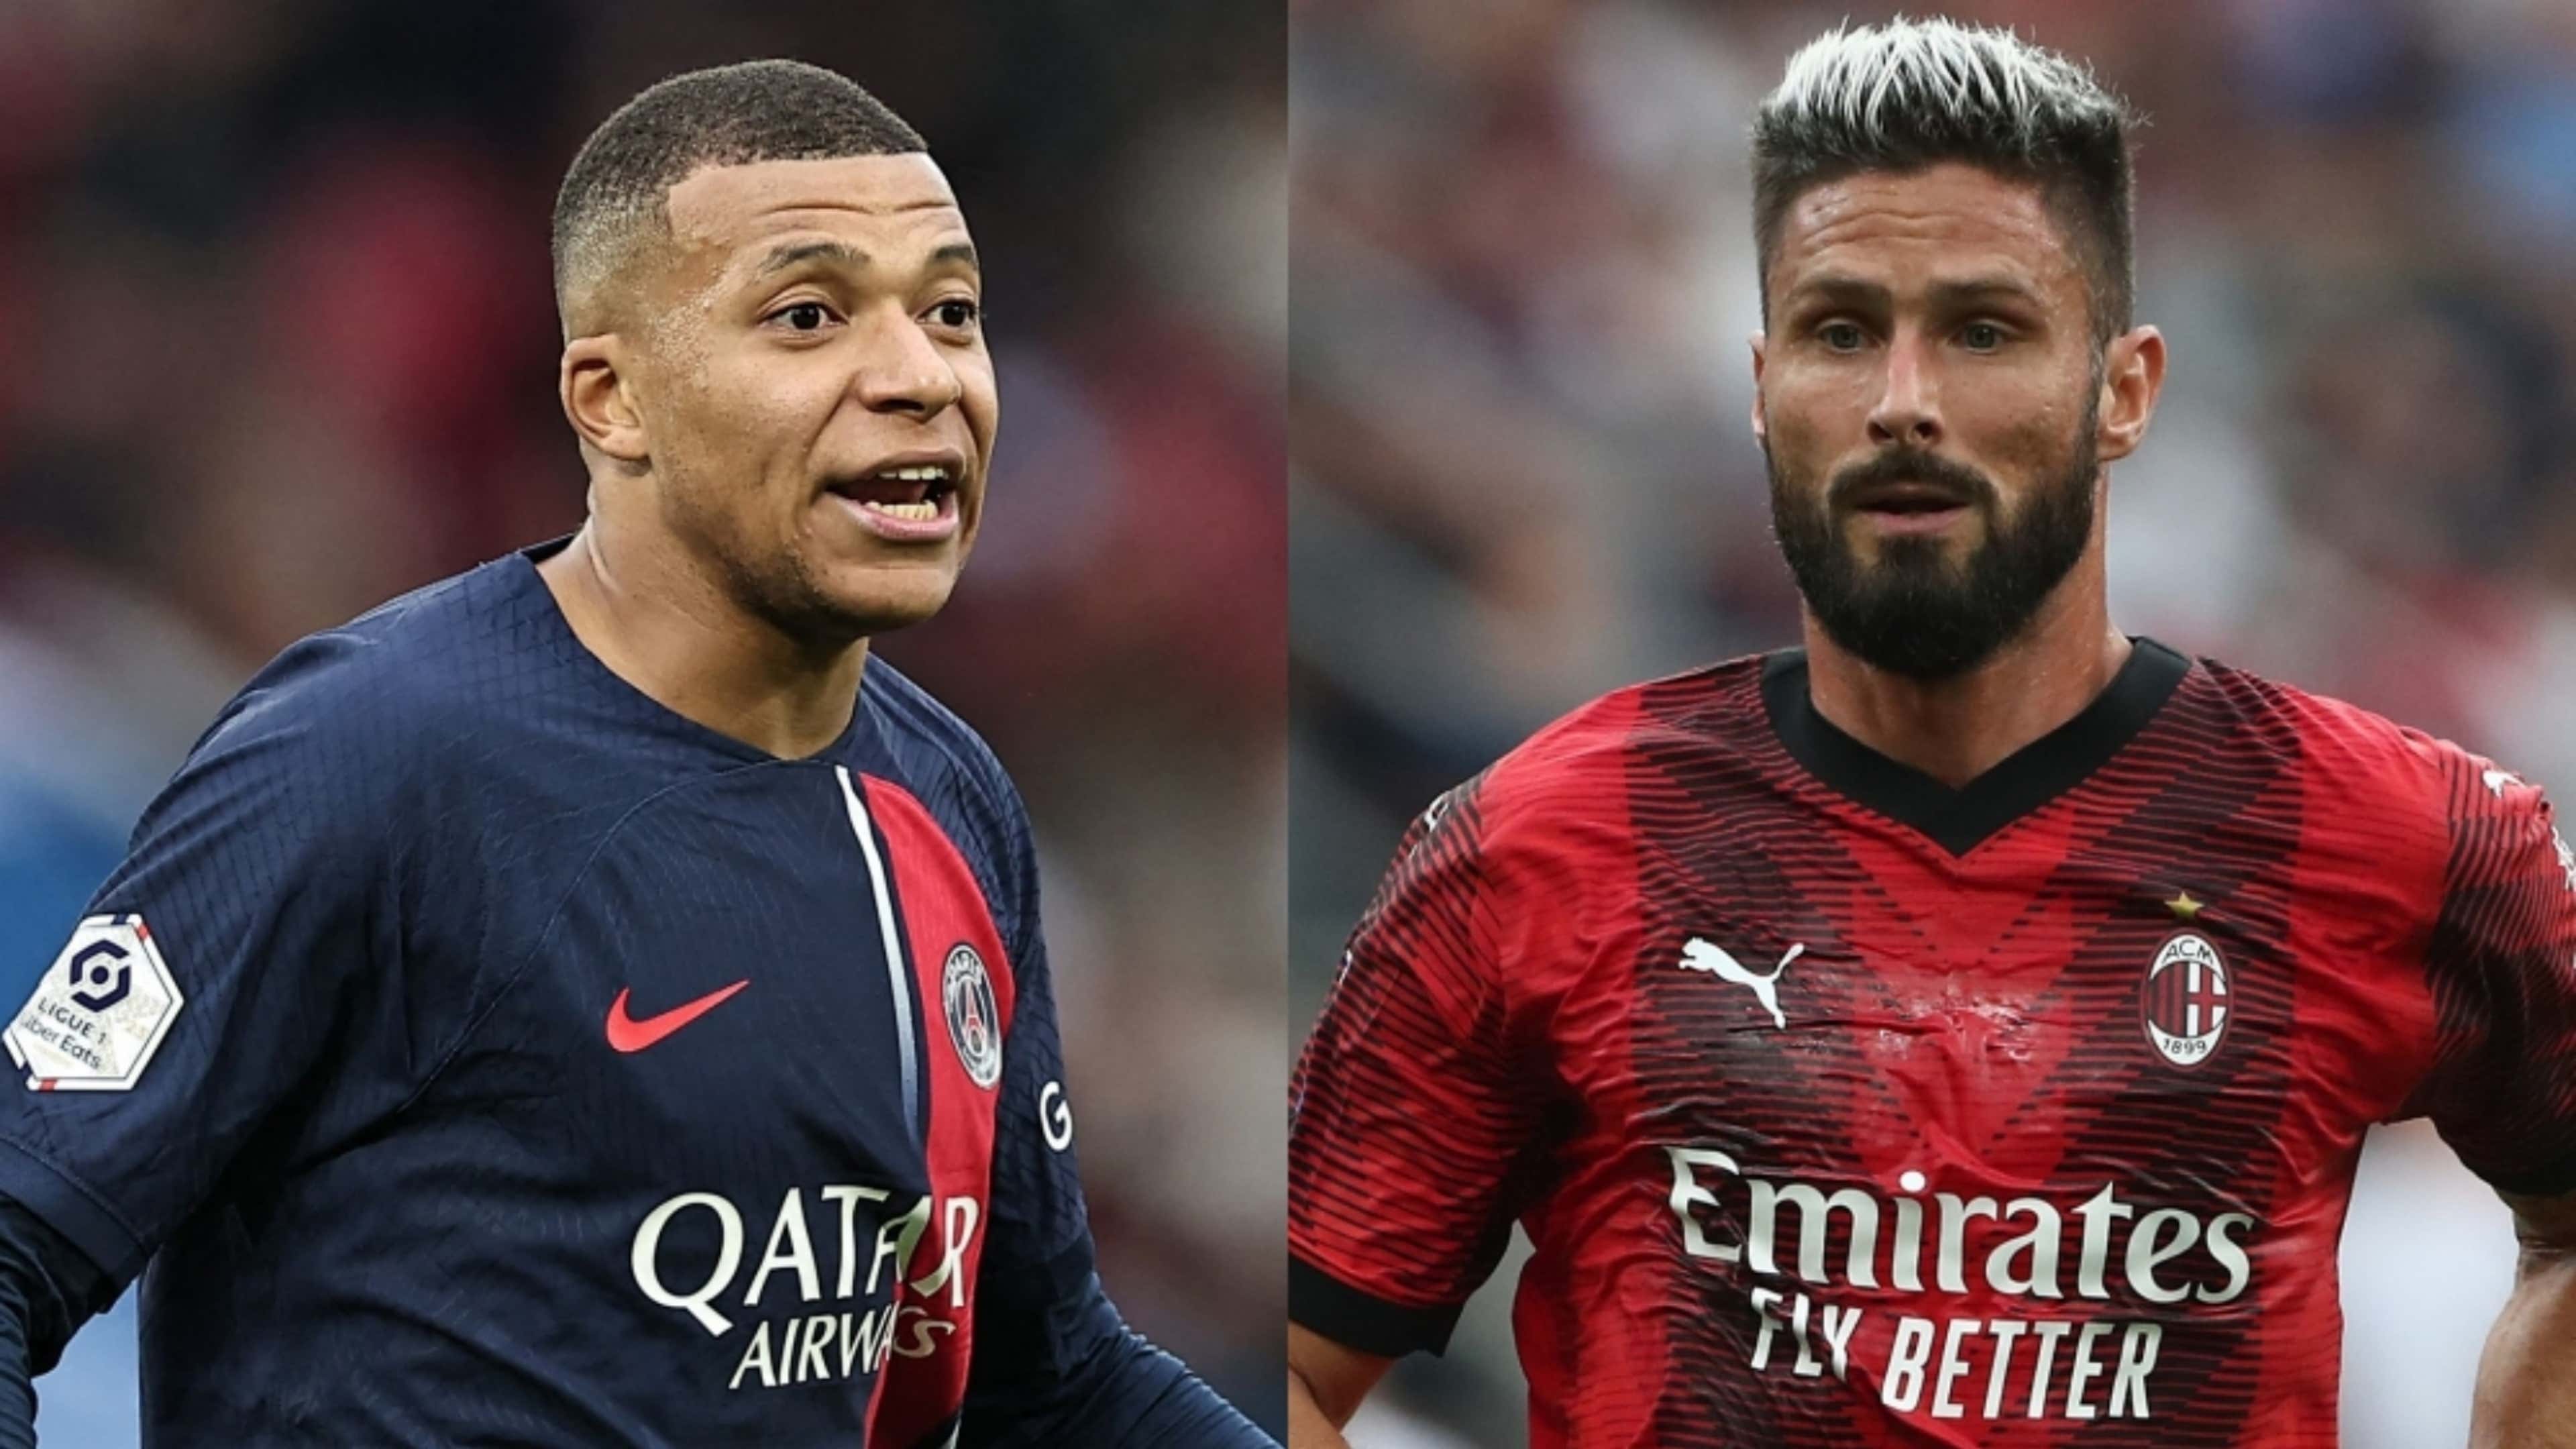 PSG vs AC Milan: Live stream, TV channel, kick-off time & where to watch | Goal.com UK